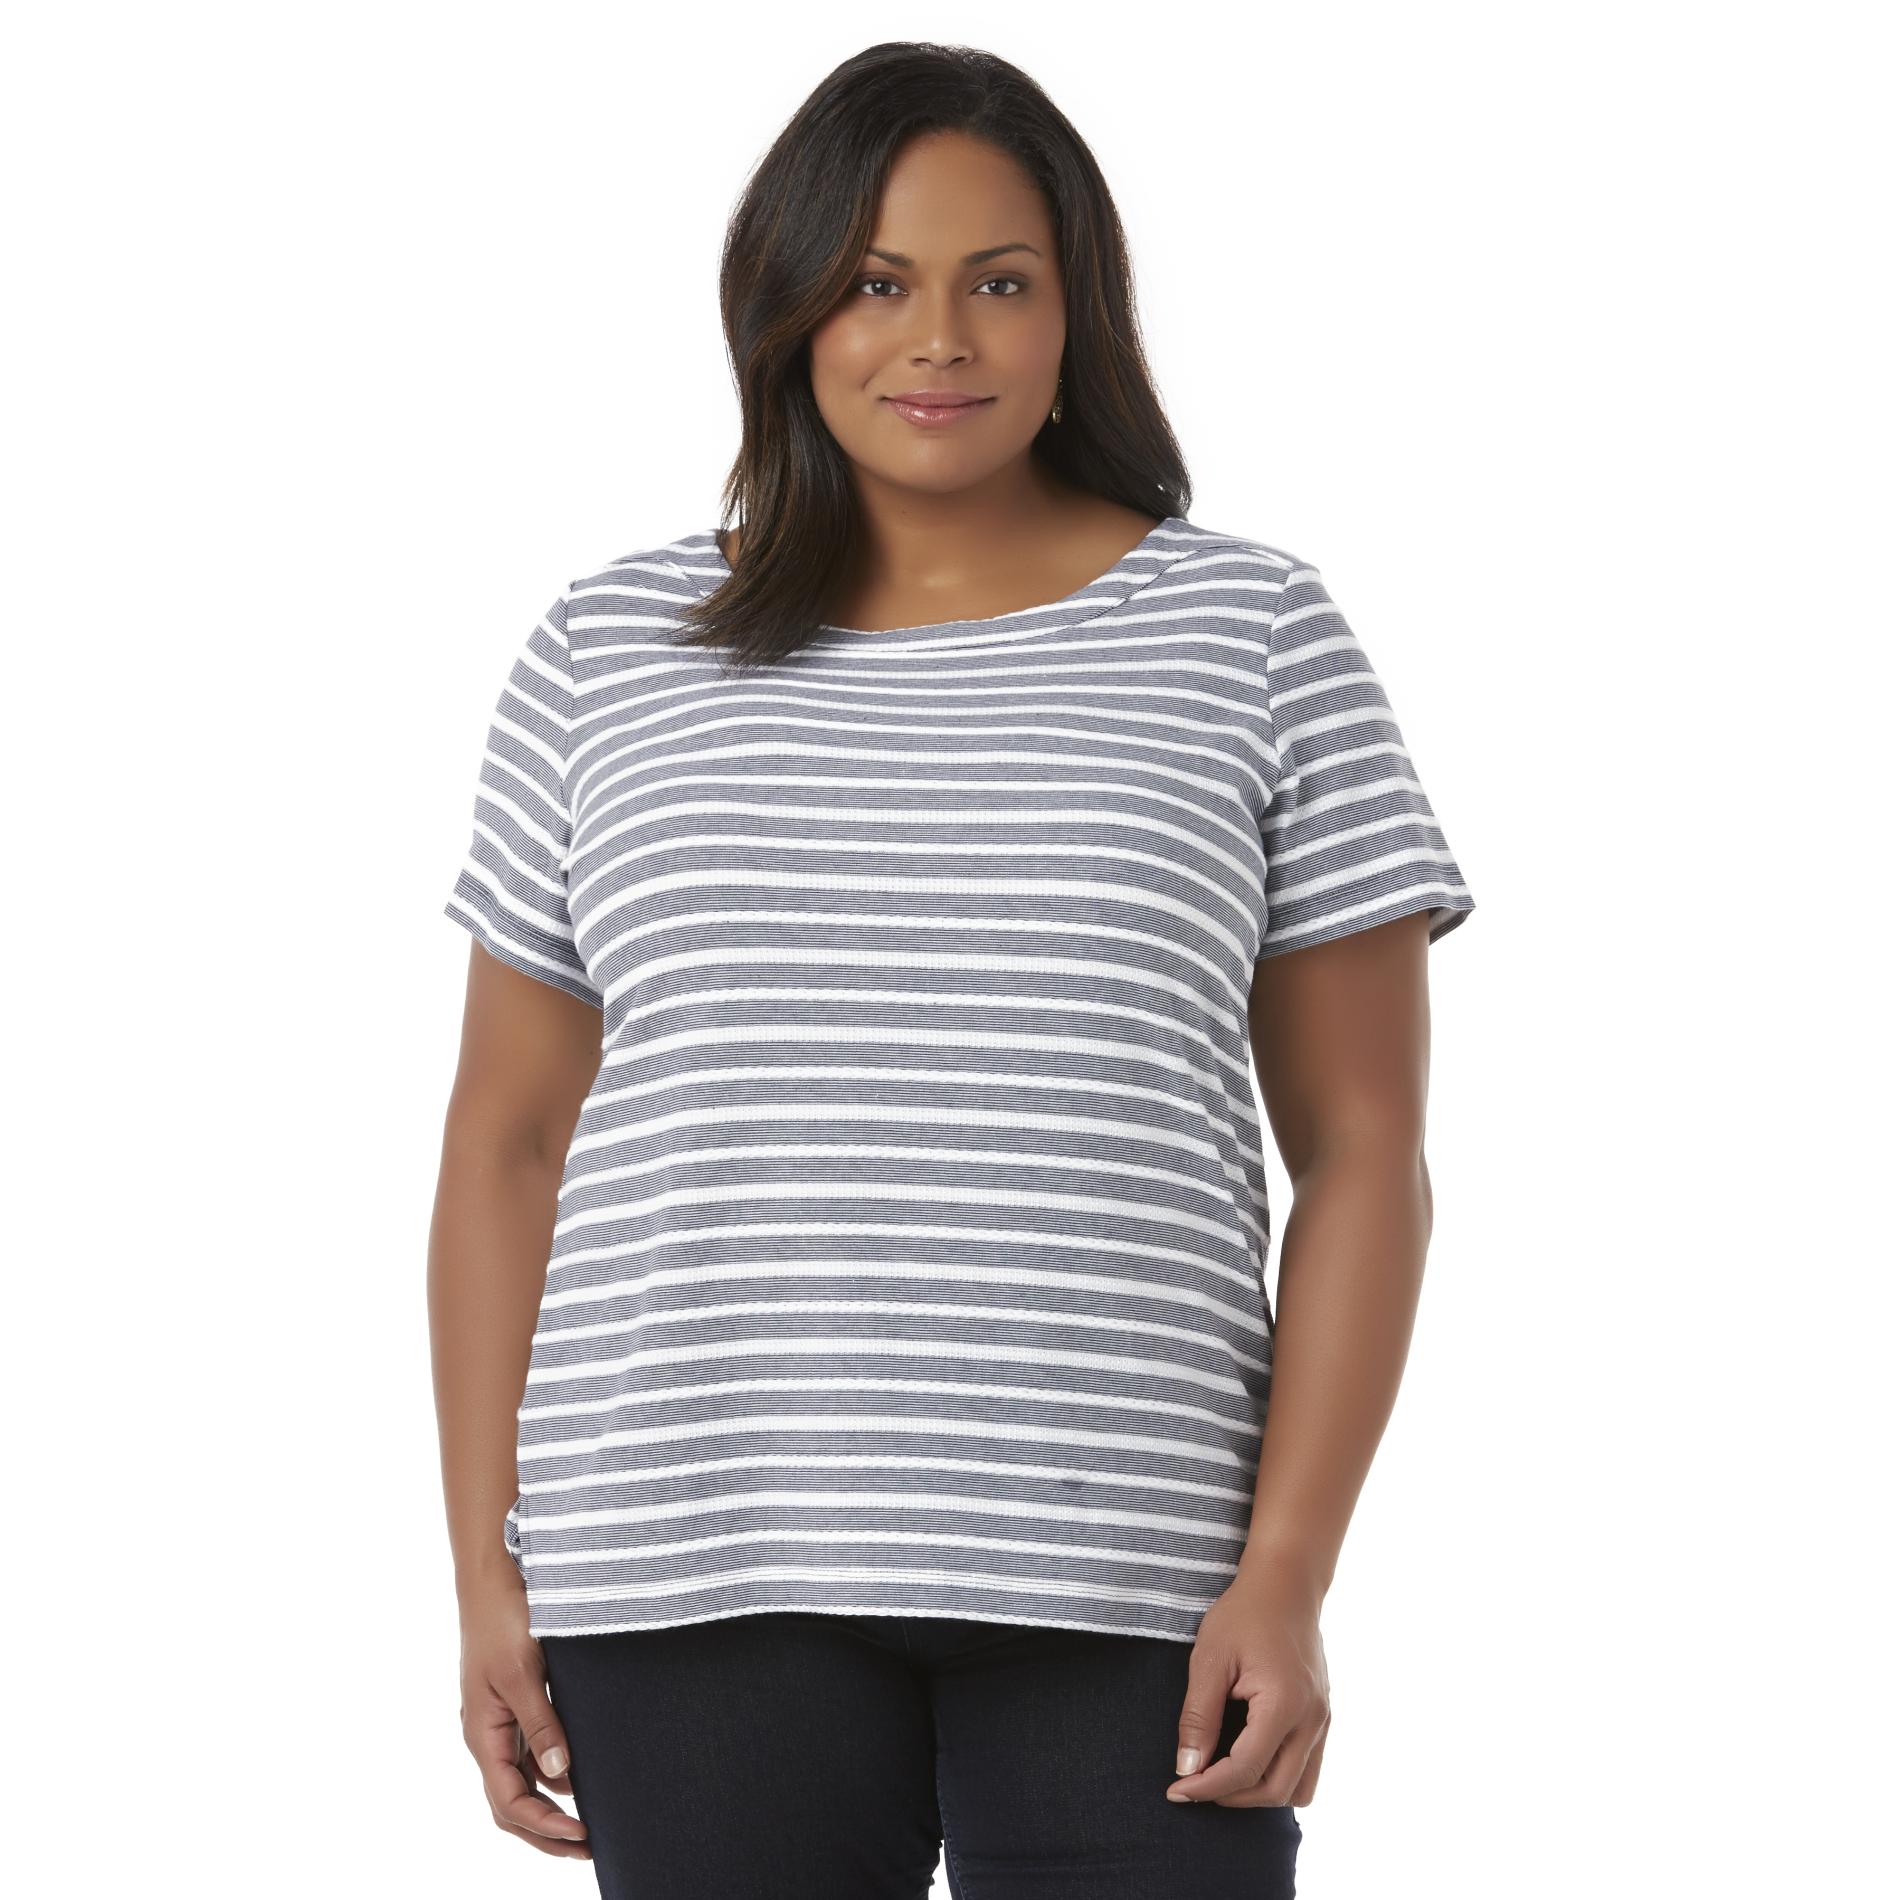 Basic Editions Women's Plus Short-Sleeve Top - Striped